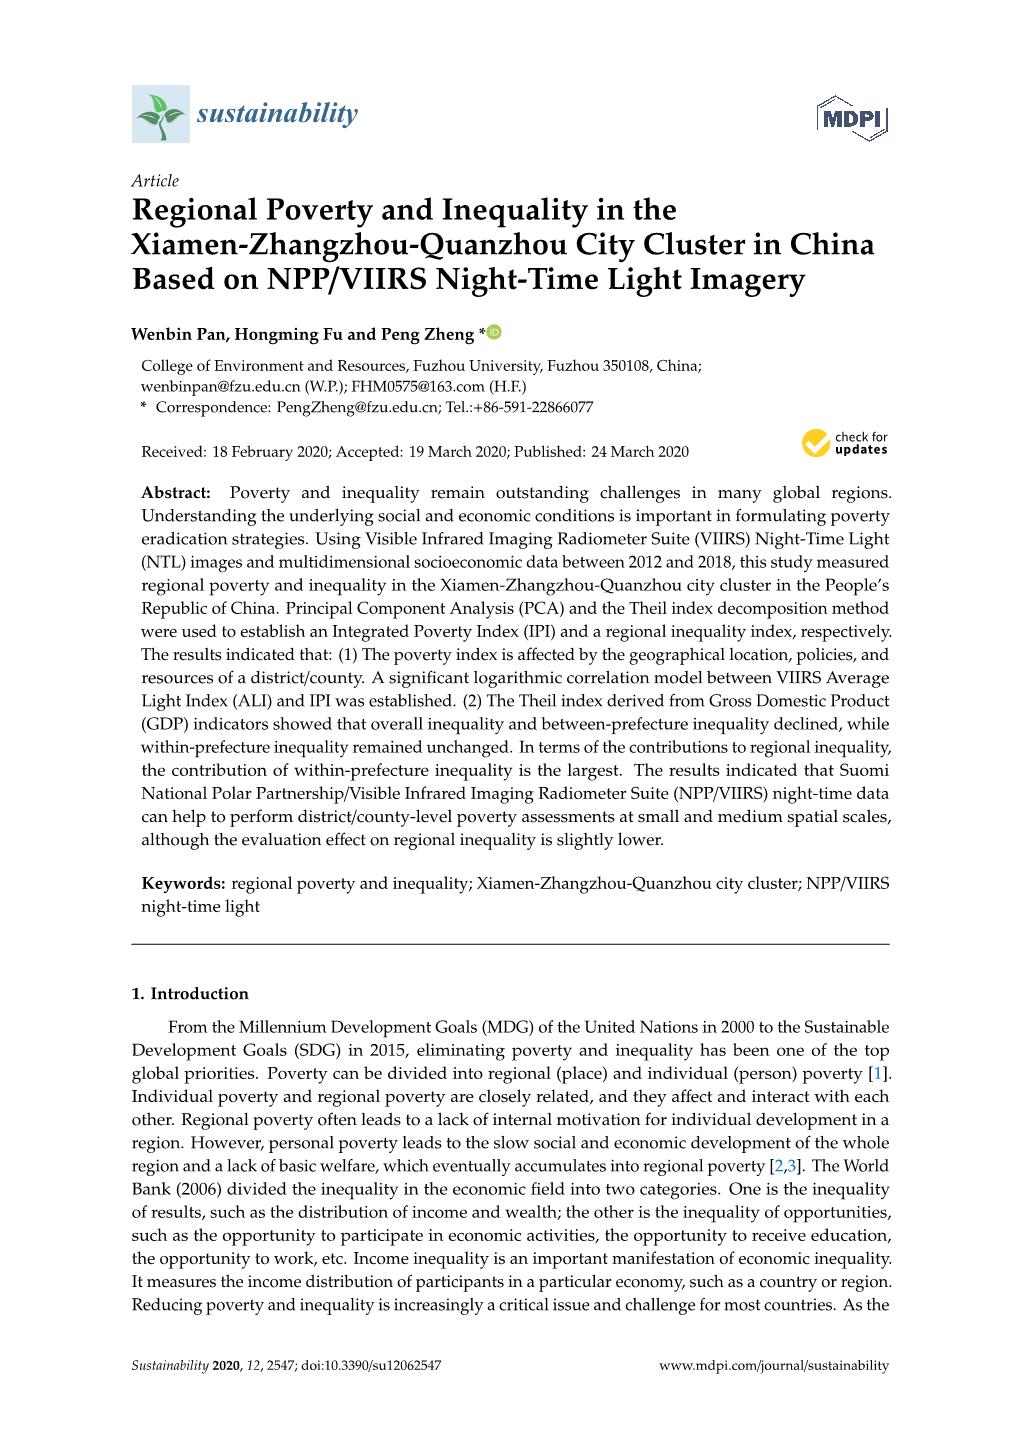 Regional Poverty and Inequality in the Xiamen-Zhangzhou-Quanzhou City Cluster in China Based on NPP/VIIRS Night-Time Light Imagery